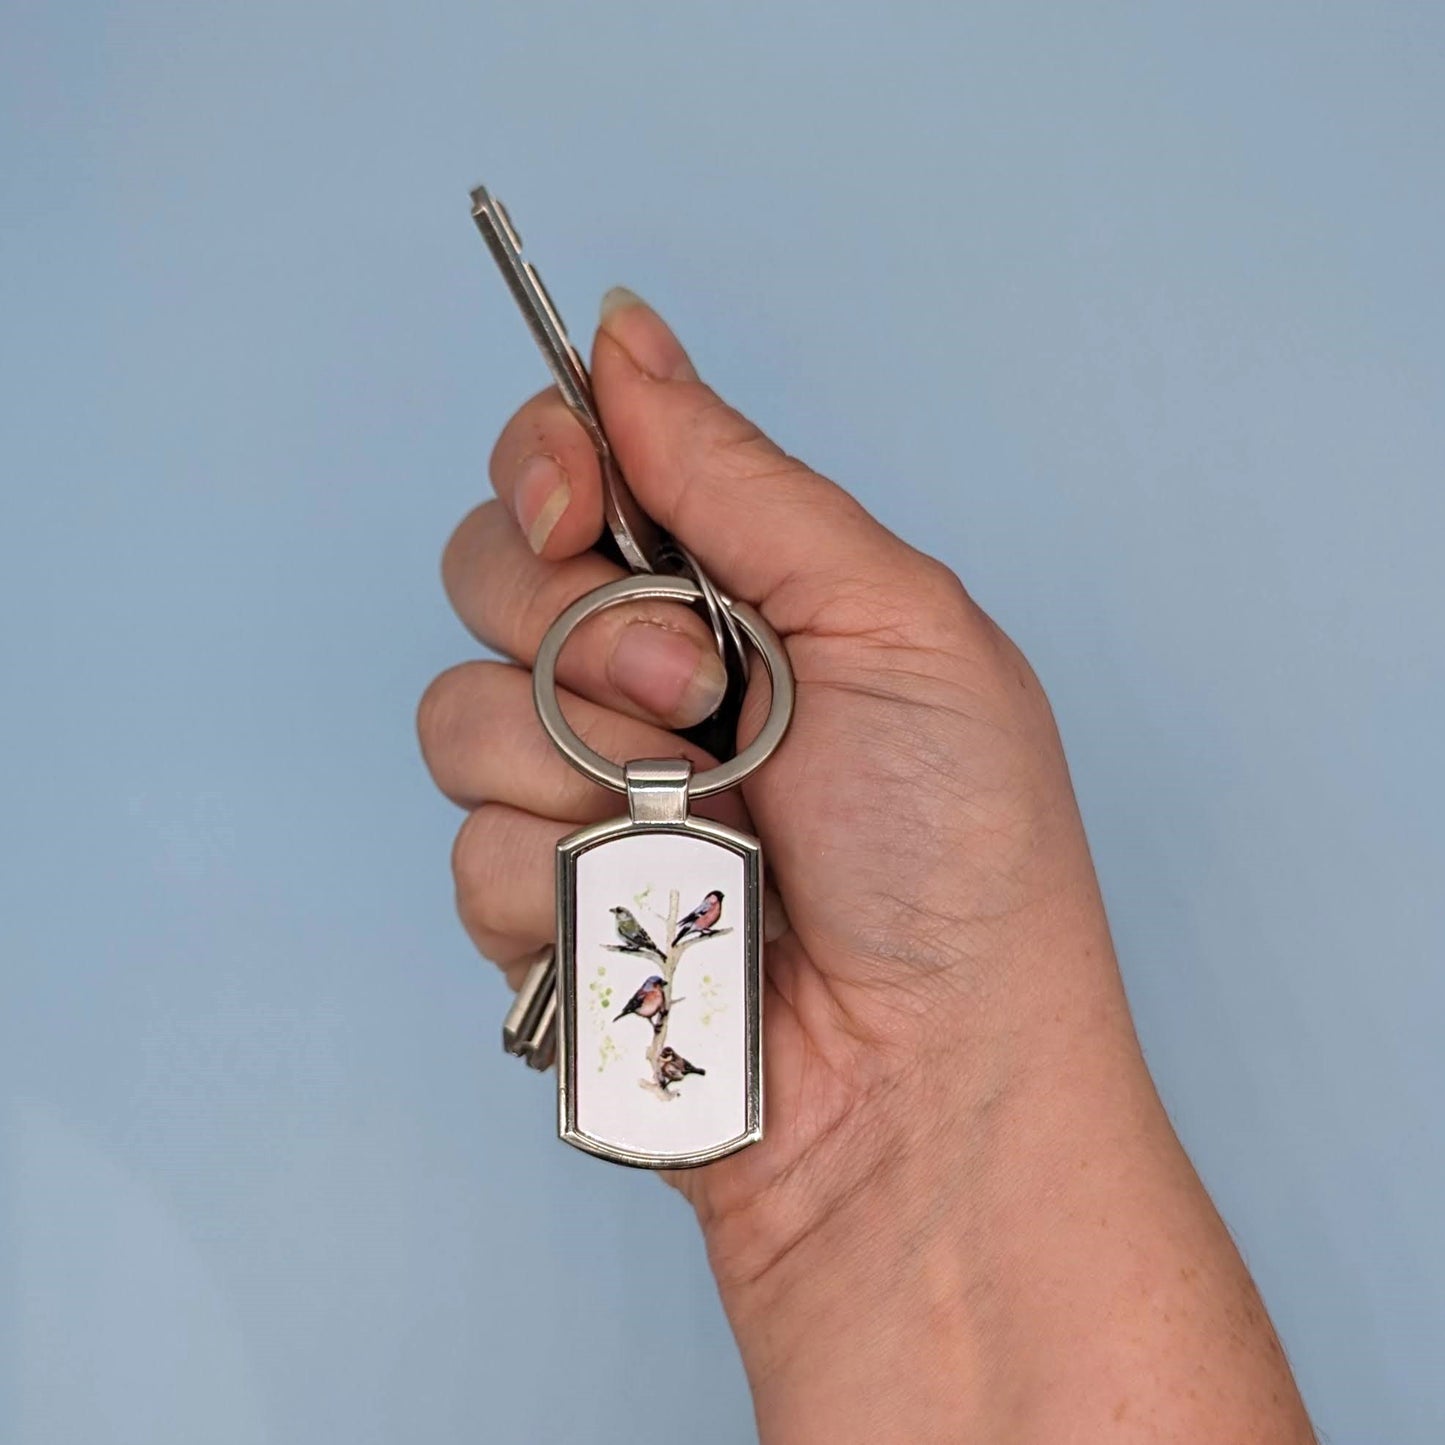 "Fours a Charm" British Finches Keyring